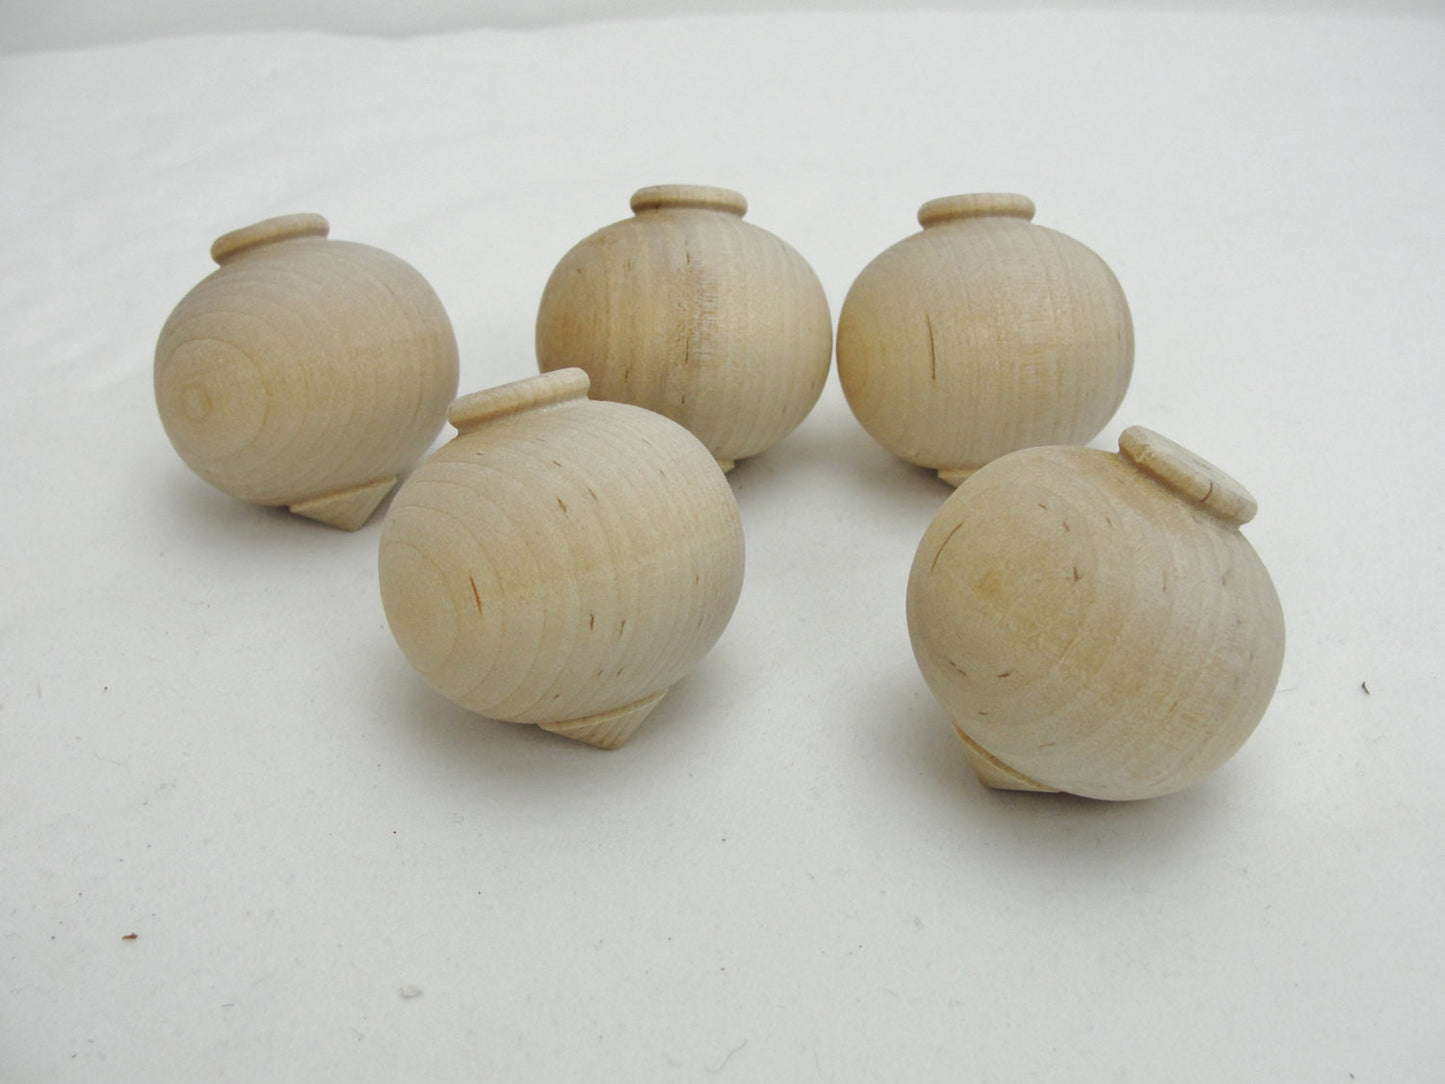 Small wooden turned ornament set of 5 - Wood parts - Craft Supply House